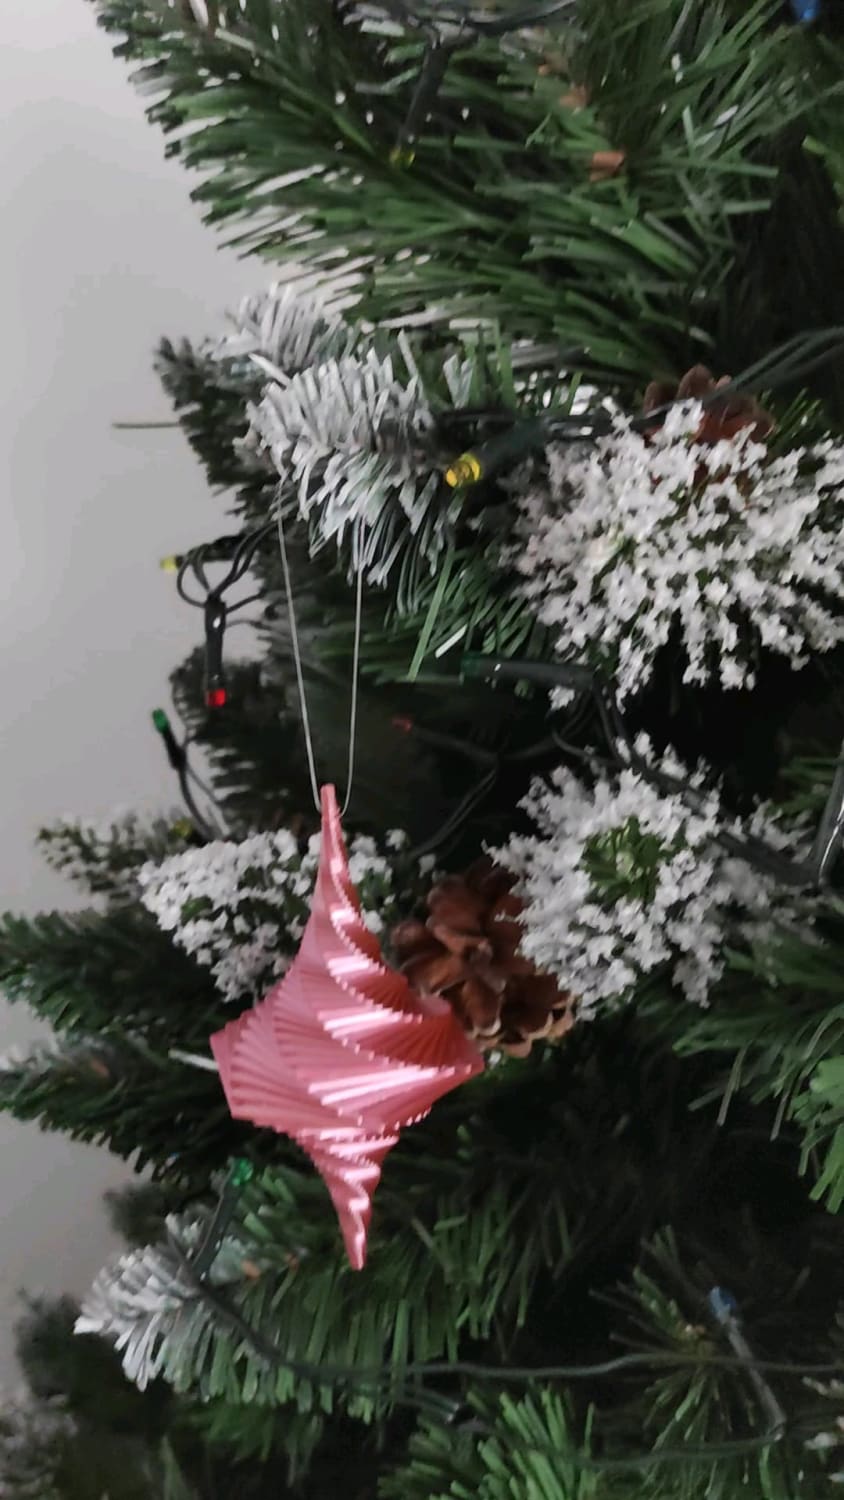 Took the first thing I ever designed and turned it into Christmas tree decorations